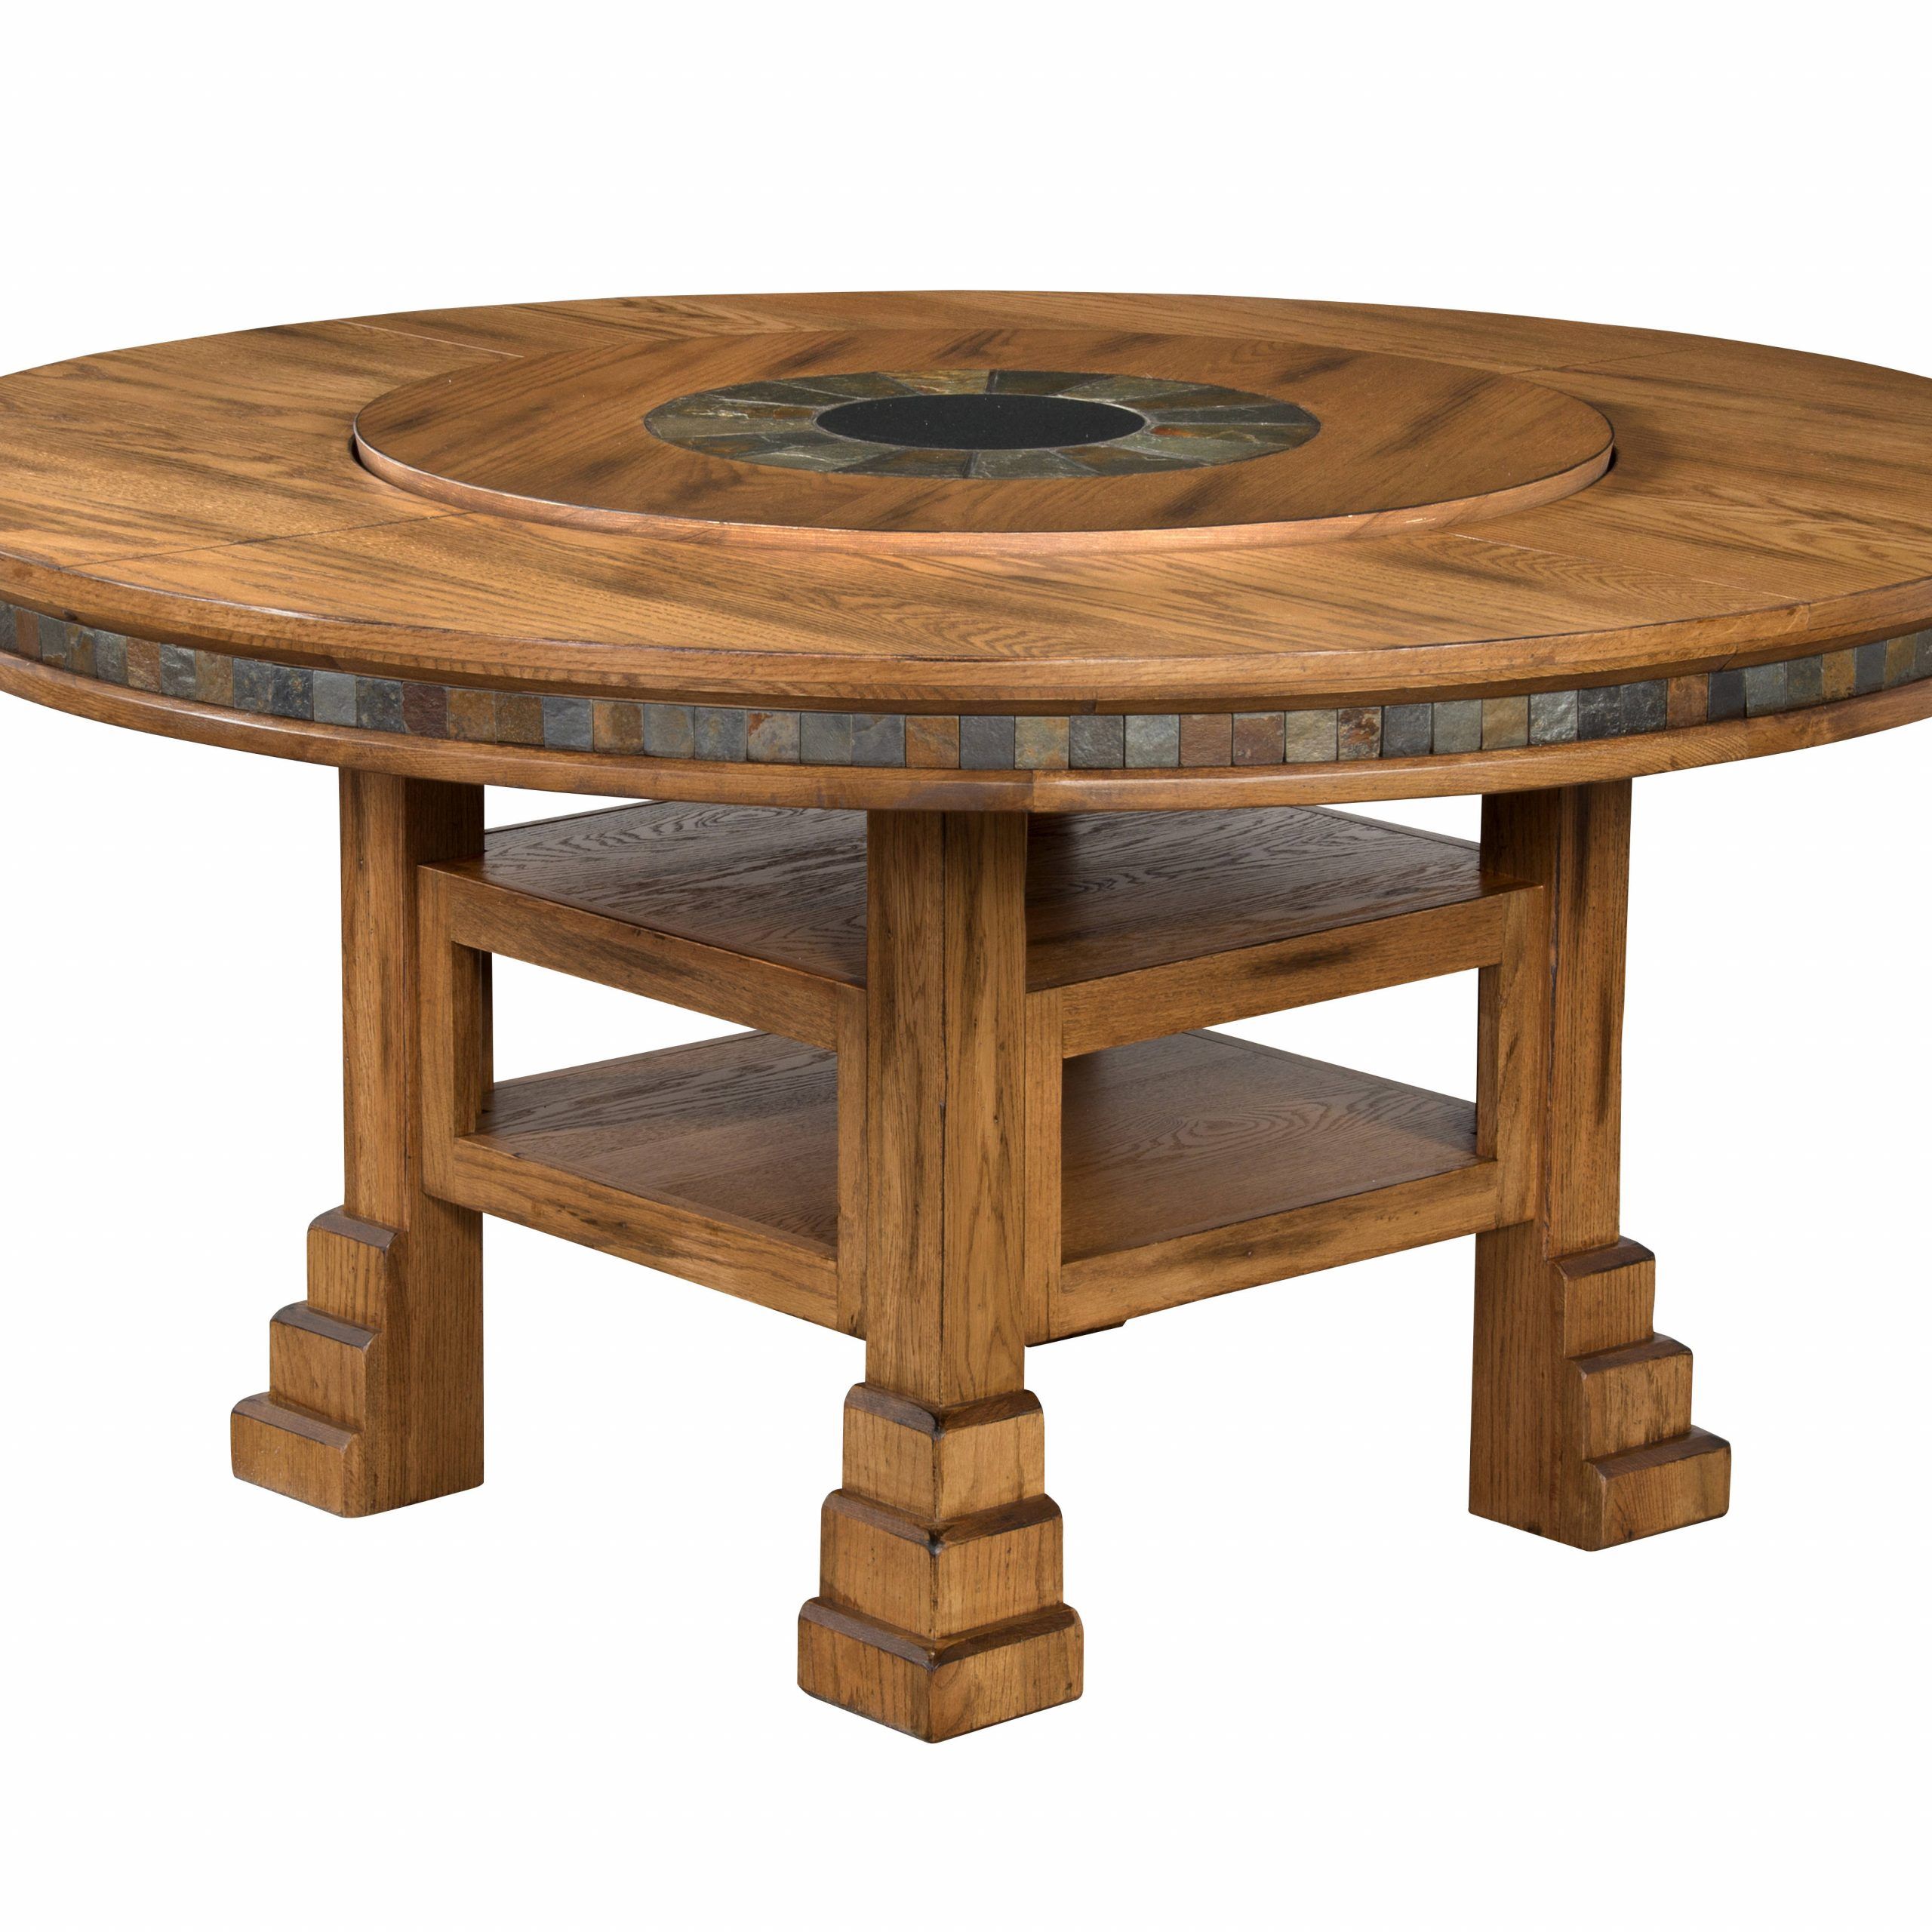 Sunny Designs Sedona Light Brown Round Table | The Classy Home Throughout Current Light Brown Round Dining Tables (View 1 of 15)